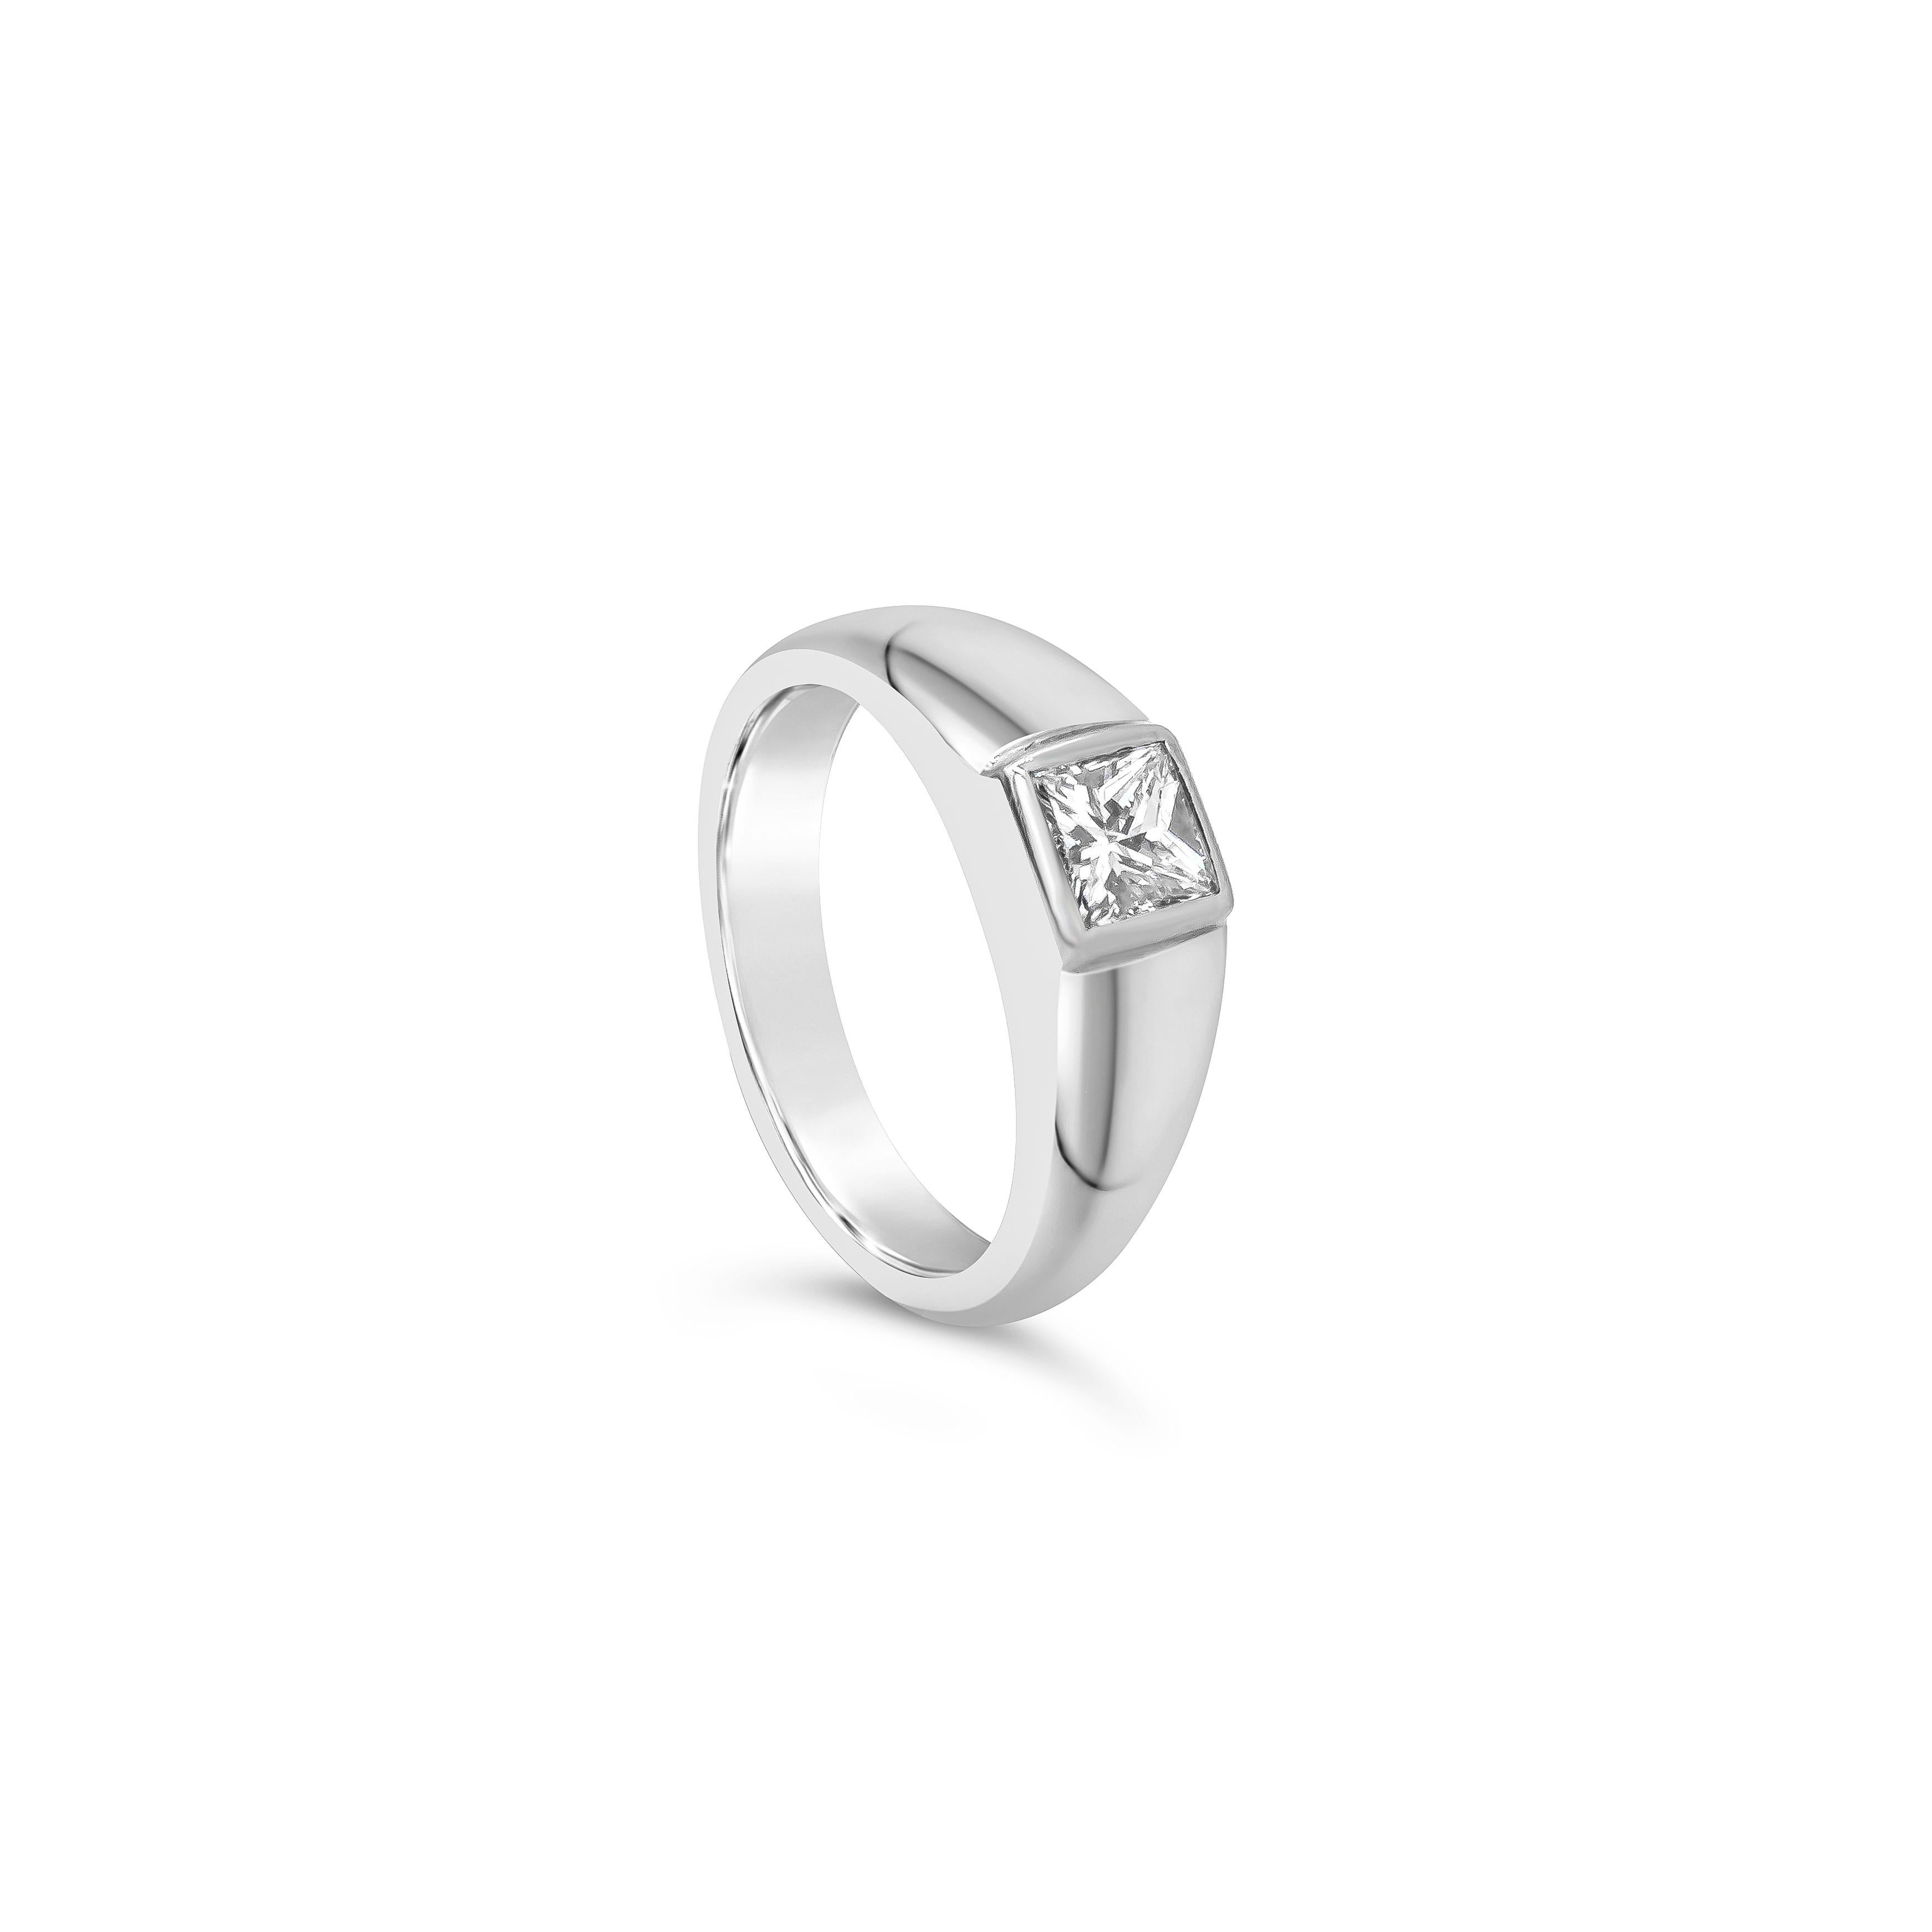 A simple and timeless solitaire engagement ring style showcasing a single princess cut diamond weighing 0.52 carats total, E Color and SI2 in Clarity, set in a bezel set. Made in 14K White Gold, Size 5.5 US resizable upon request.

